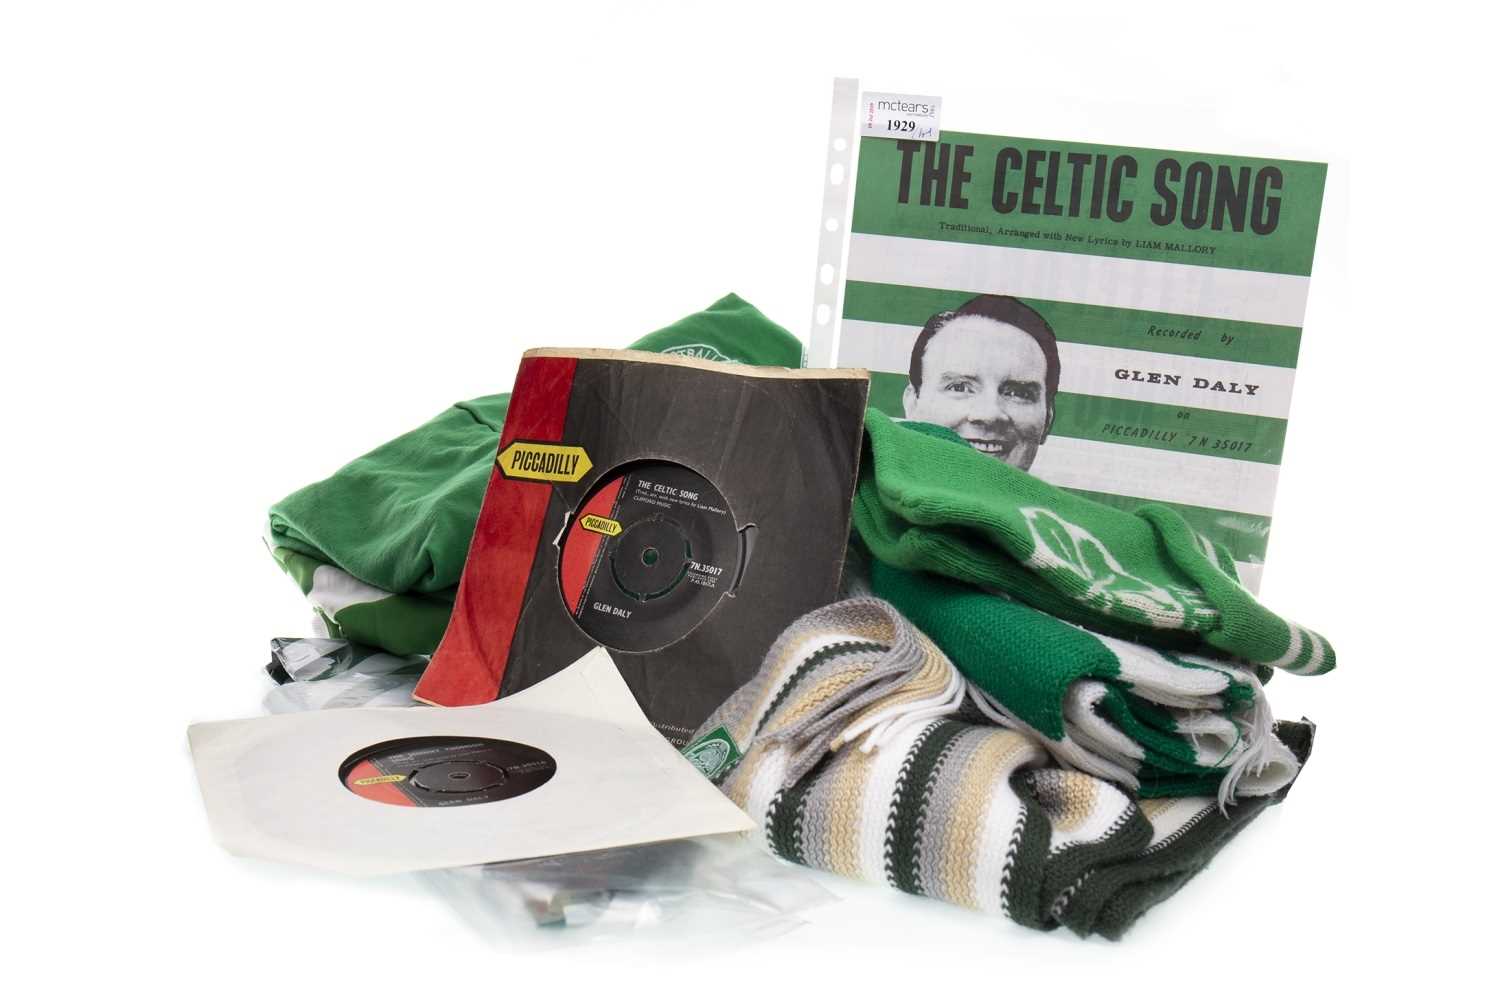 Lot 1929 - GLEN DALY, THE CELTIC SONG '45 VINYL AND OTHER CELTIC MEMORABILIA